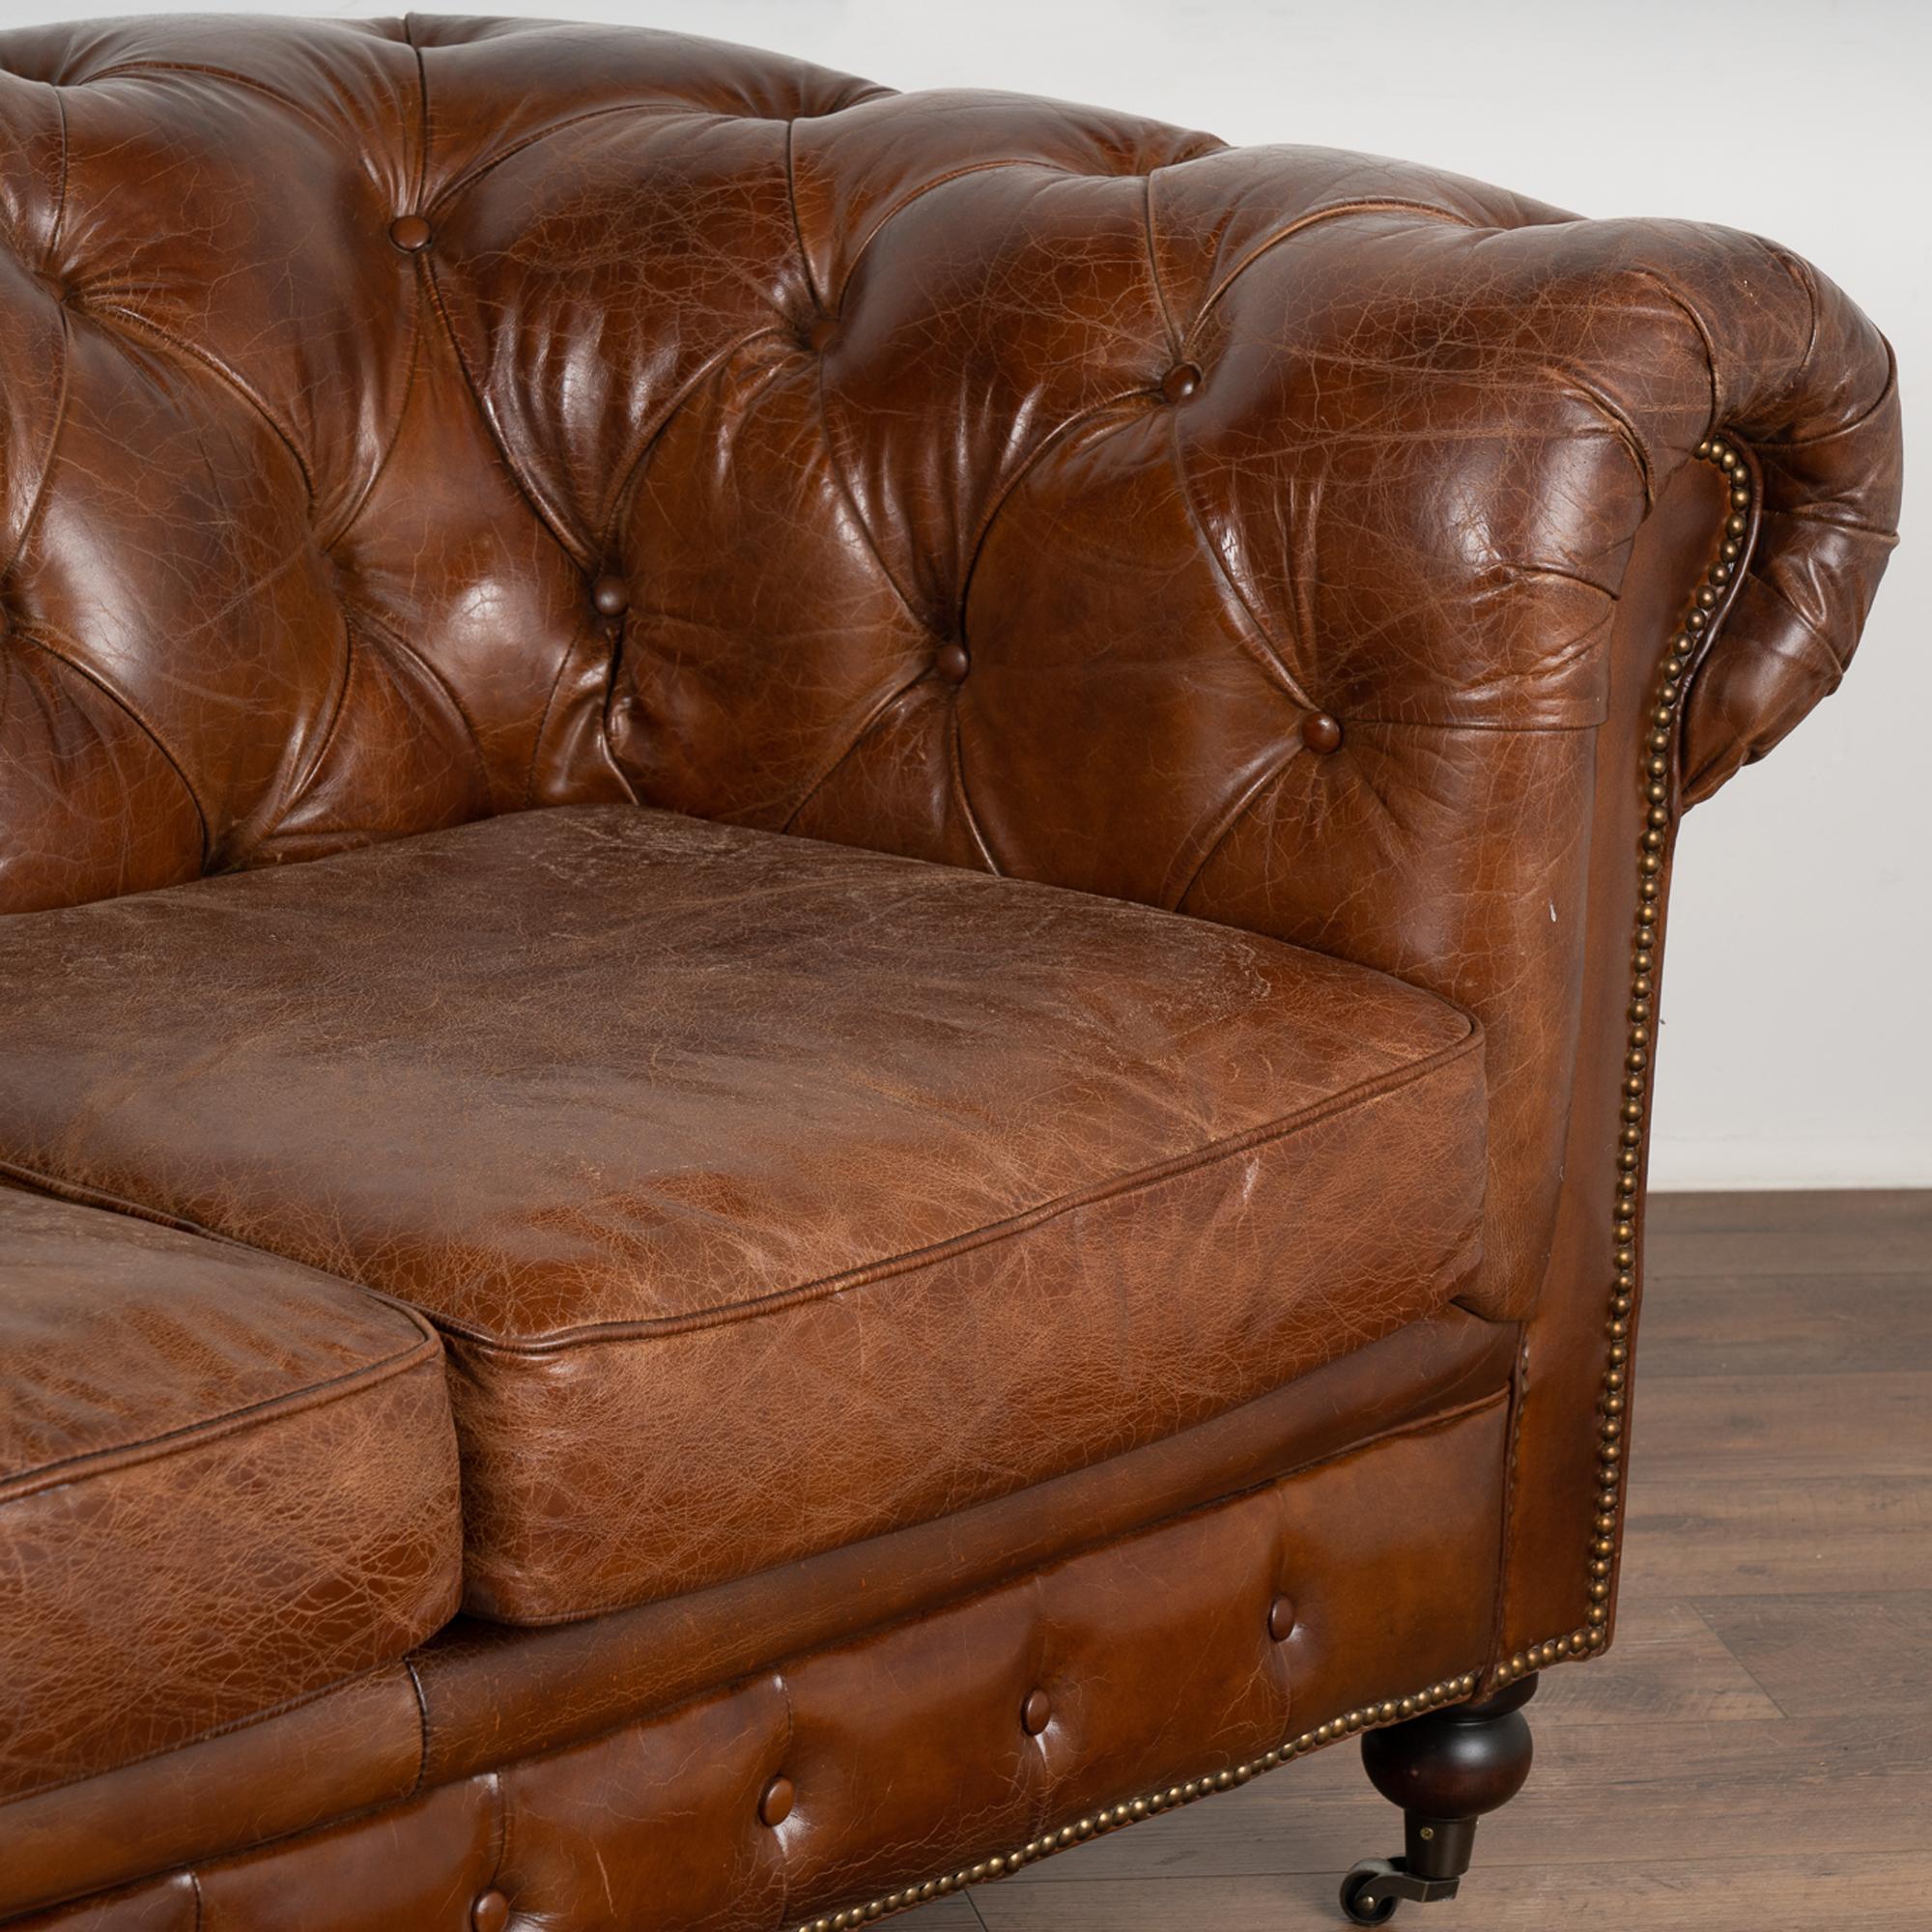 Vintage Brown Leather Chesterfield Two Seat Sofa Loveseat, England circa 1960-80 3